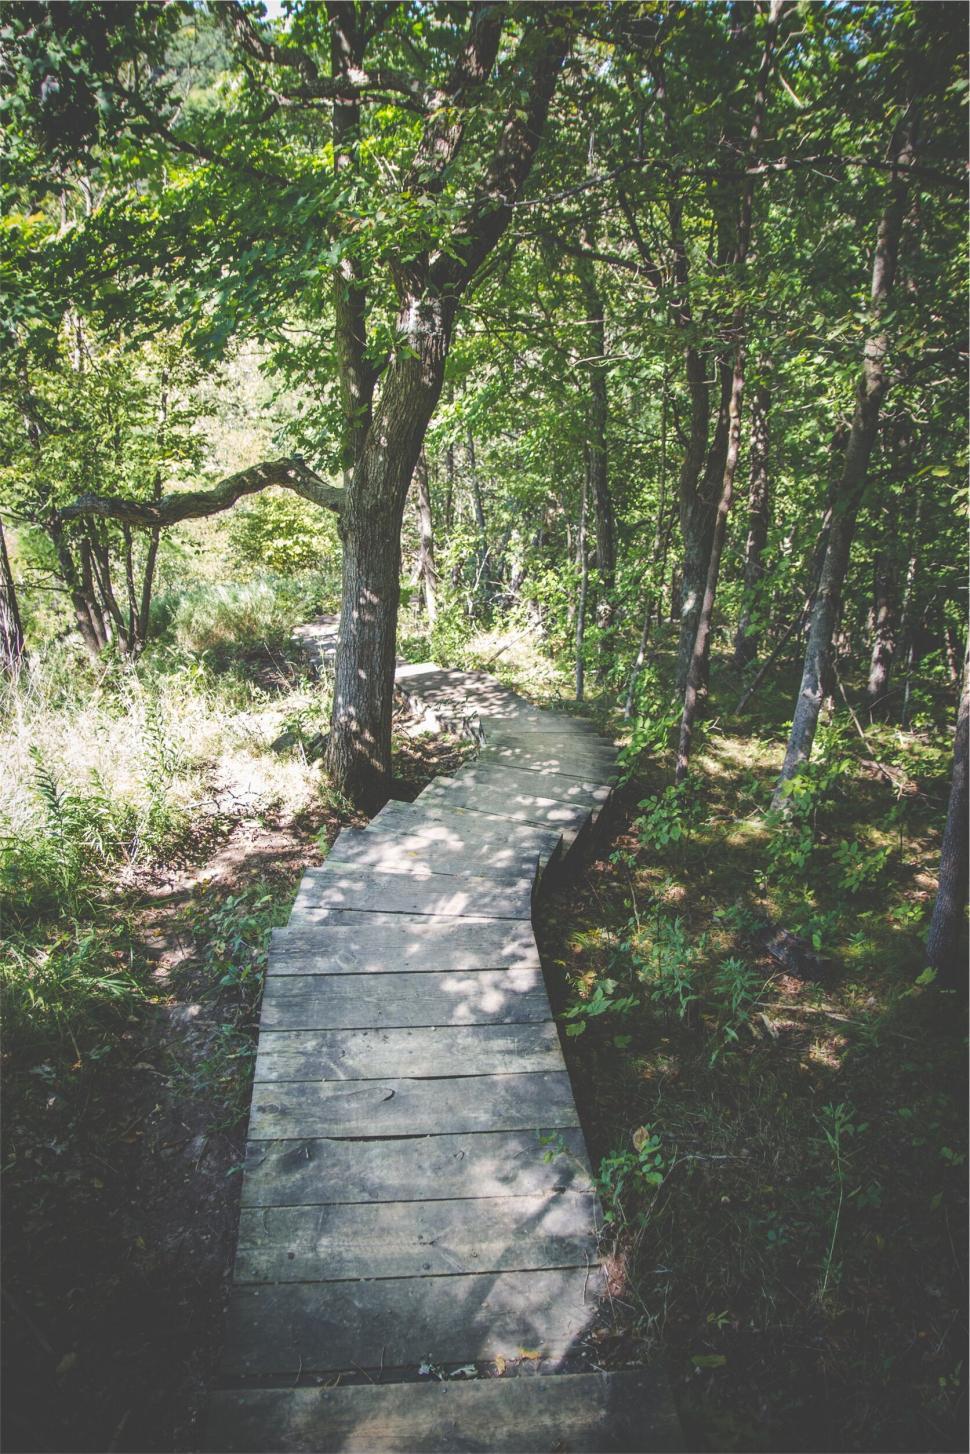 Free Image of Wooden walkway through serene forest 